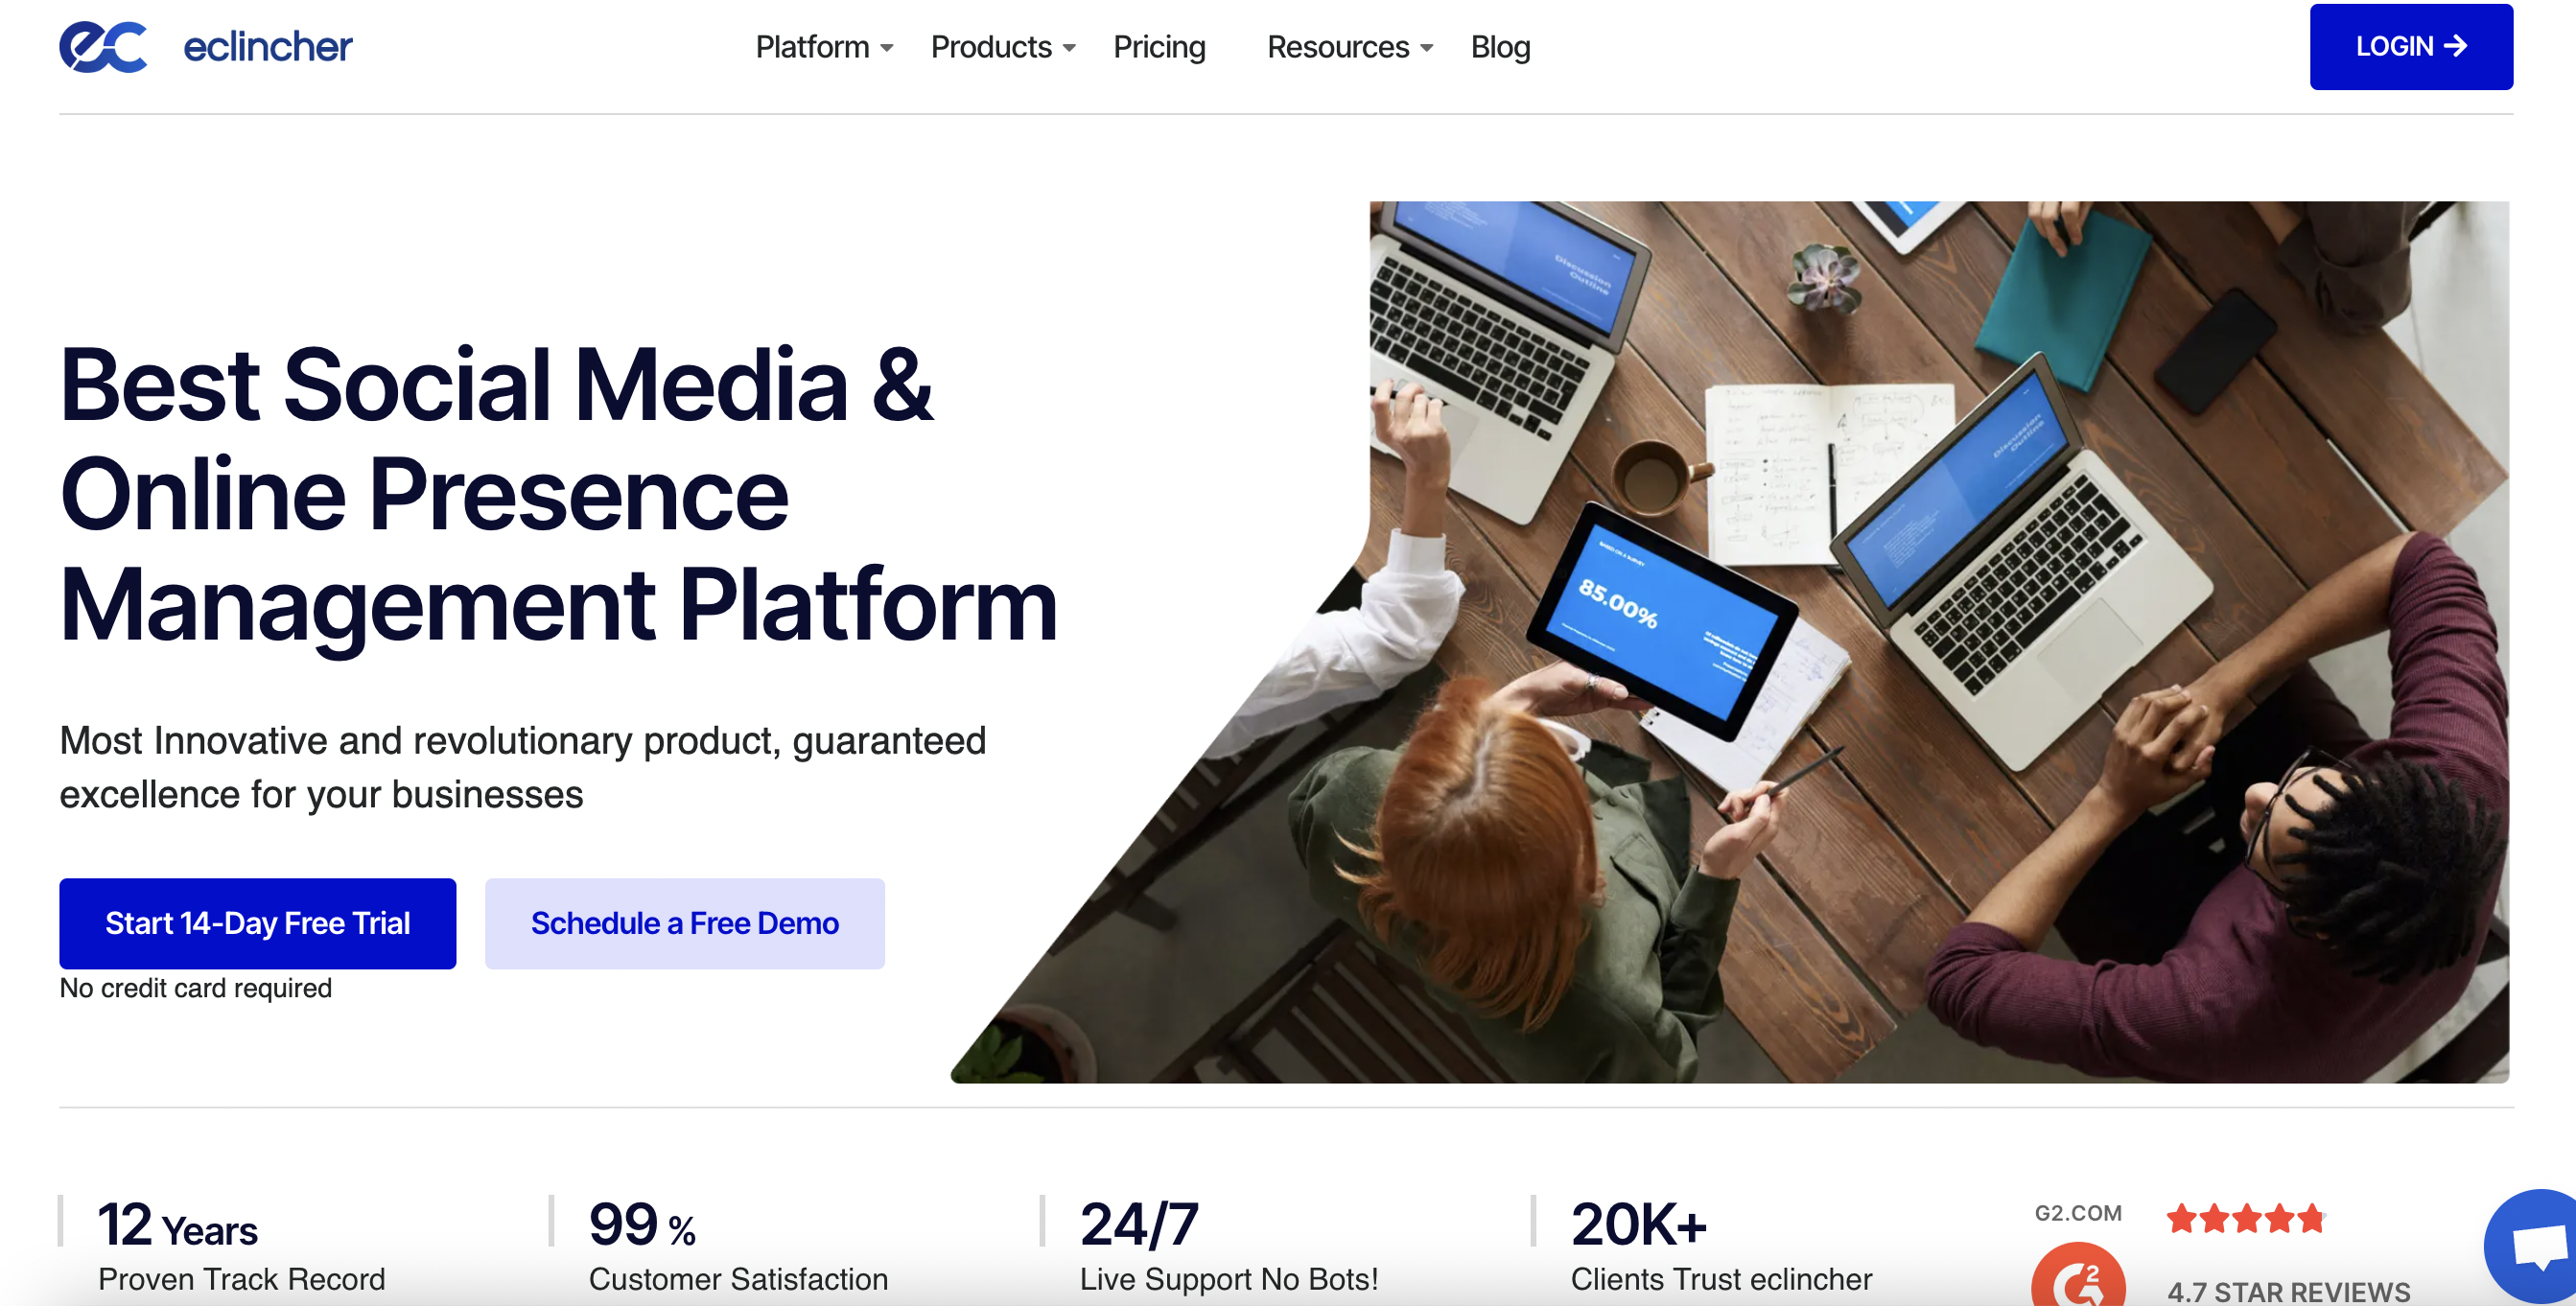 eClincher homepage with an aerial view of a team working together on a desk with laptops and tablets and text that reads "best social media and online presence management platform"